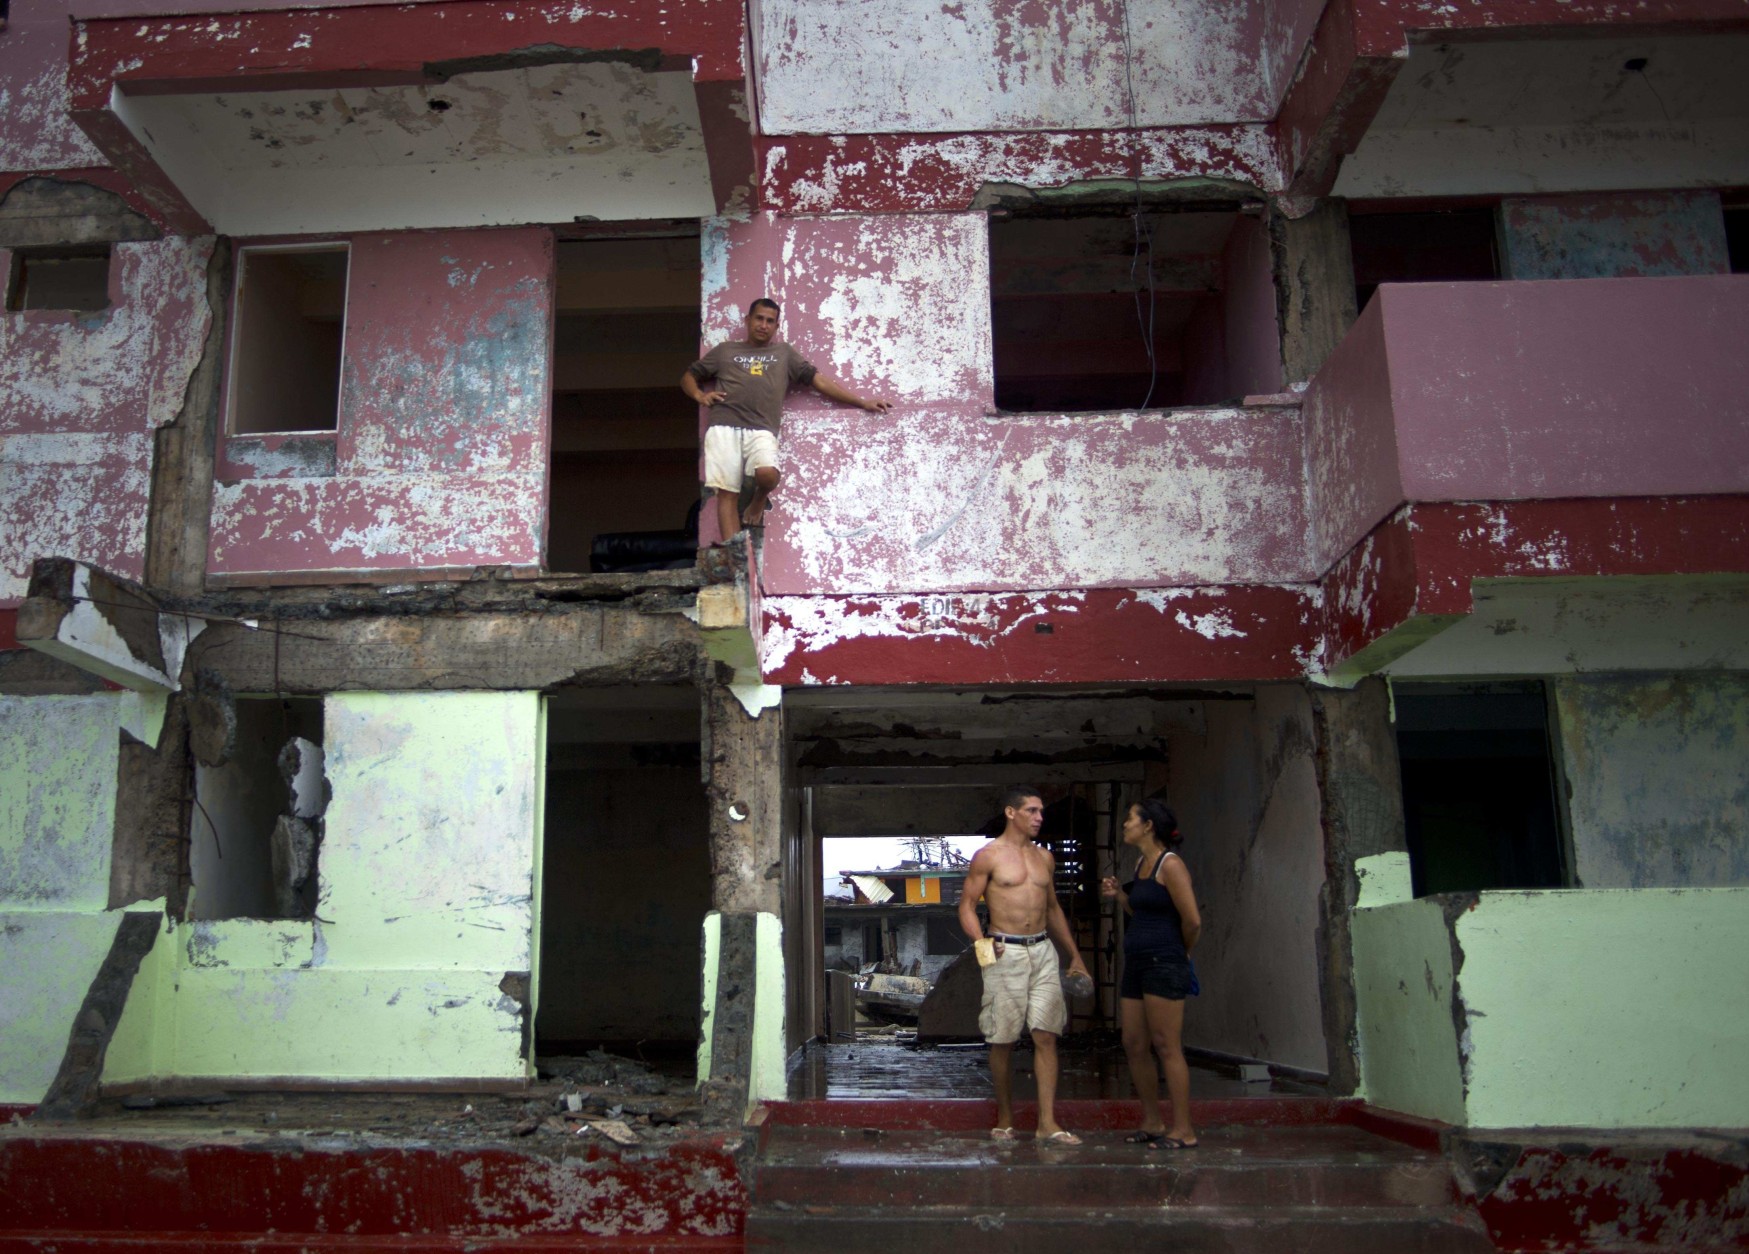 A man looks from the balcony of his house damaged by Hurricane Matthew in Baracoa, Cuba, Wednesday, Oct. 5, 2016. The hurricane rolled across the sparsely populated tip of Cuba overnight, destroying dozens of homes in Cuba's easternmost city, Baracoa, leaving hundreds of others damaged.  (AP Photo/Ramon Espinosa)